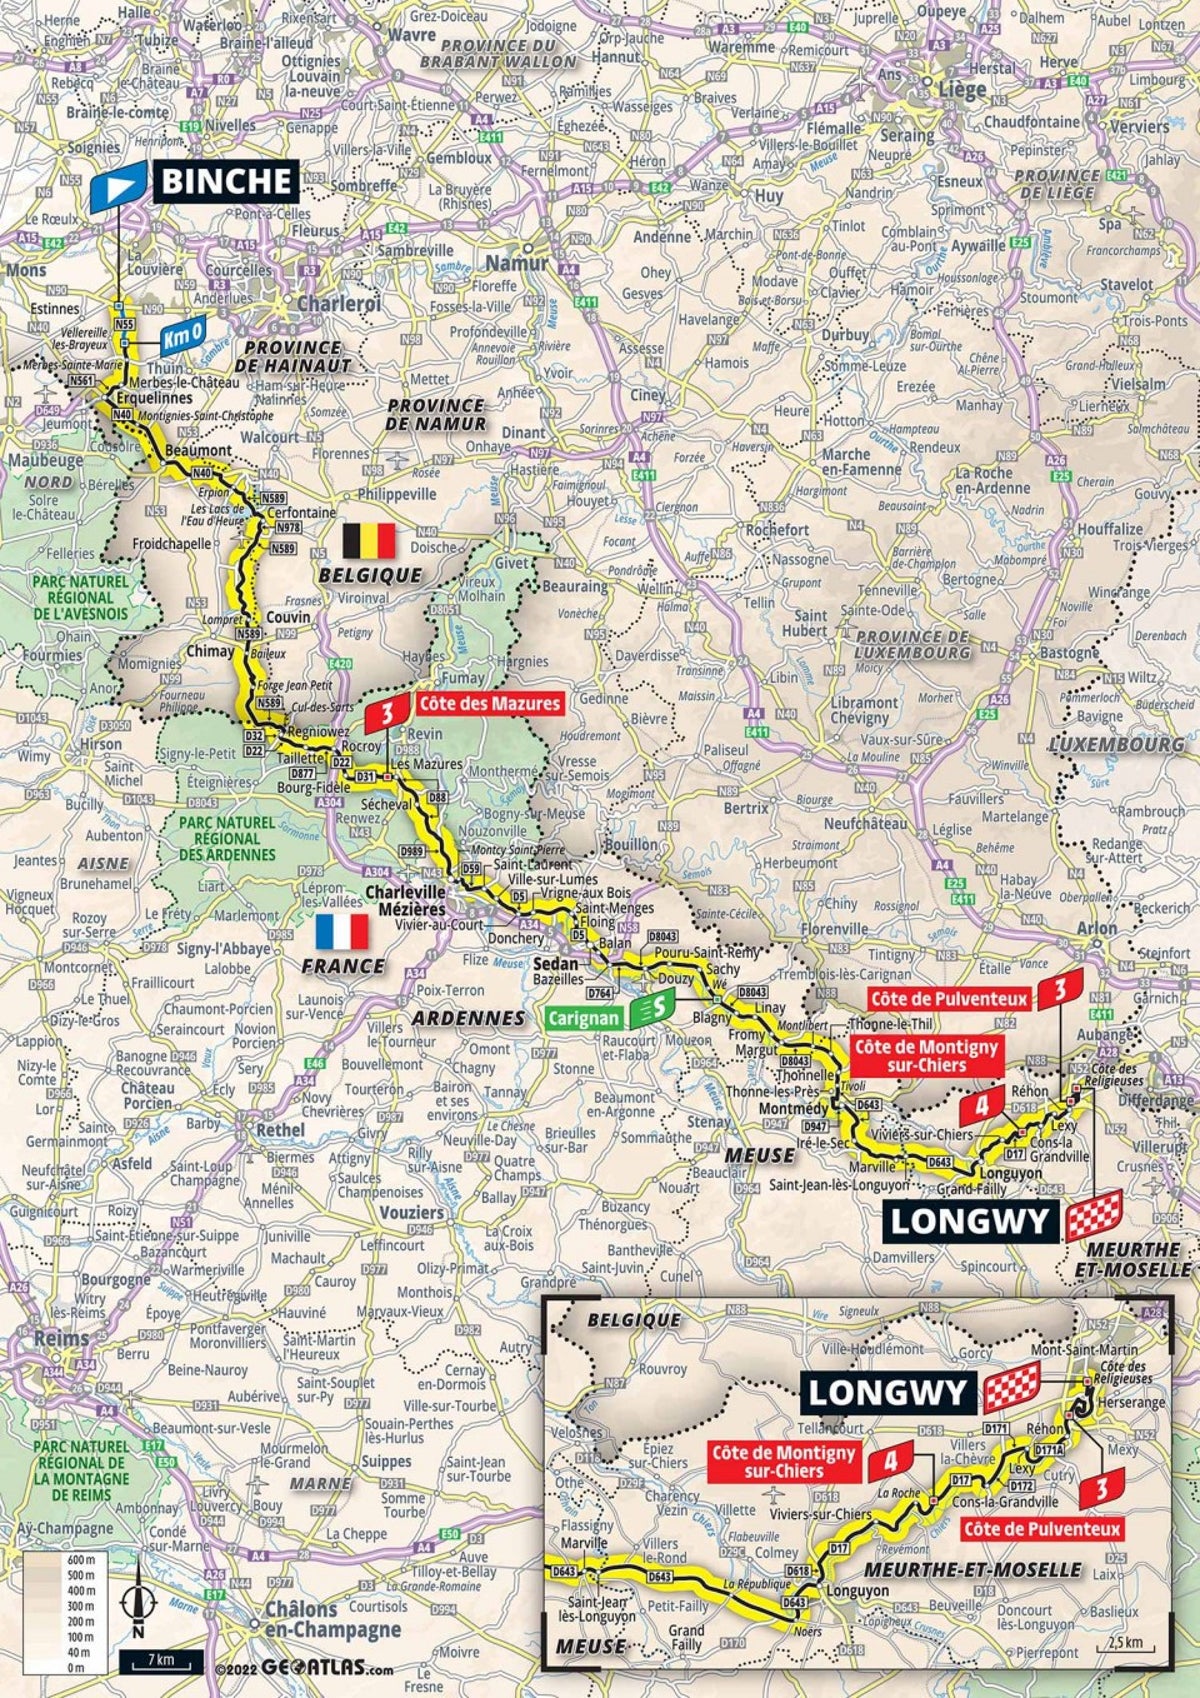 Tour de France stage 6 preview: Route map and profile of 220km route from Binche to Longwy